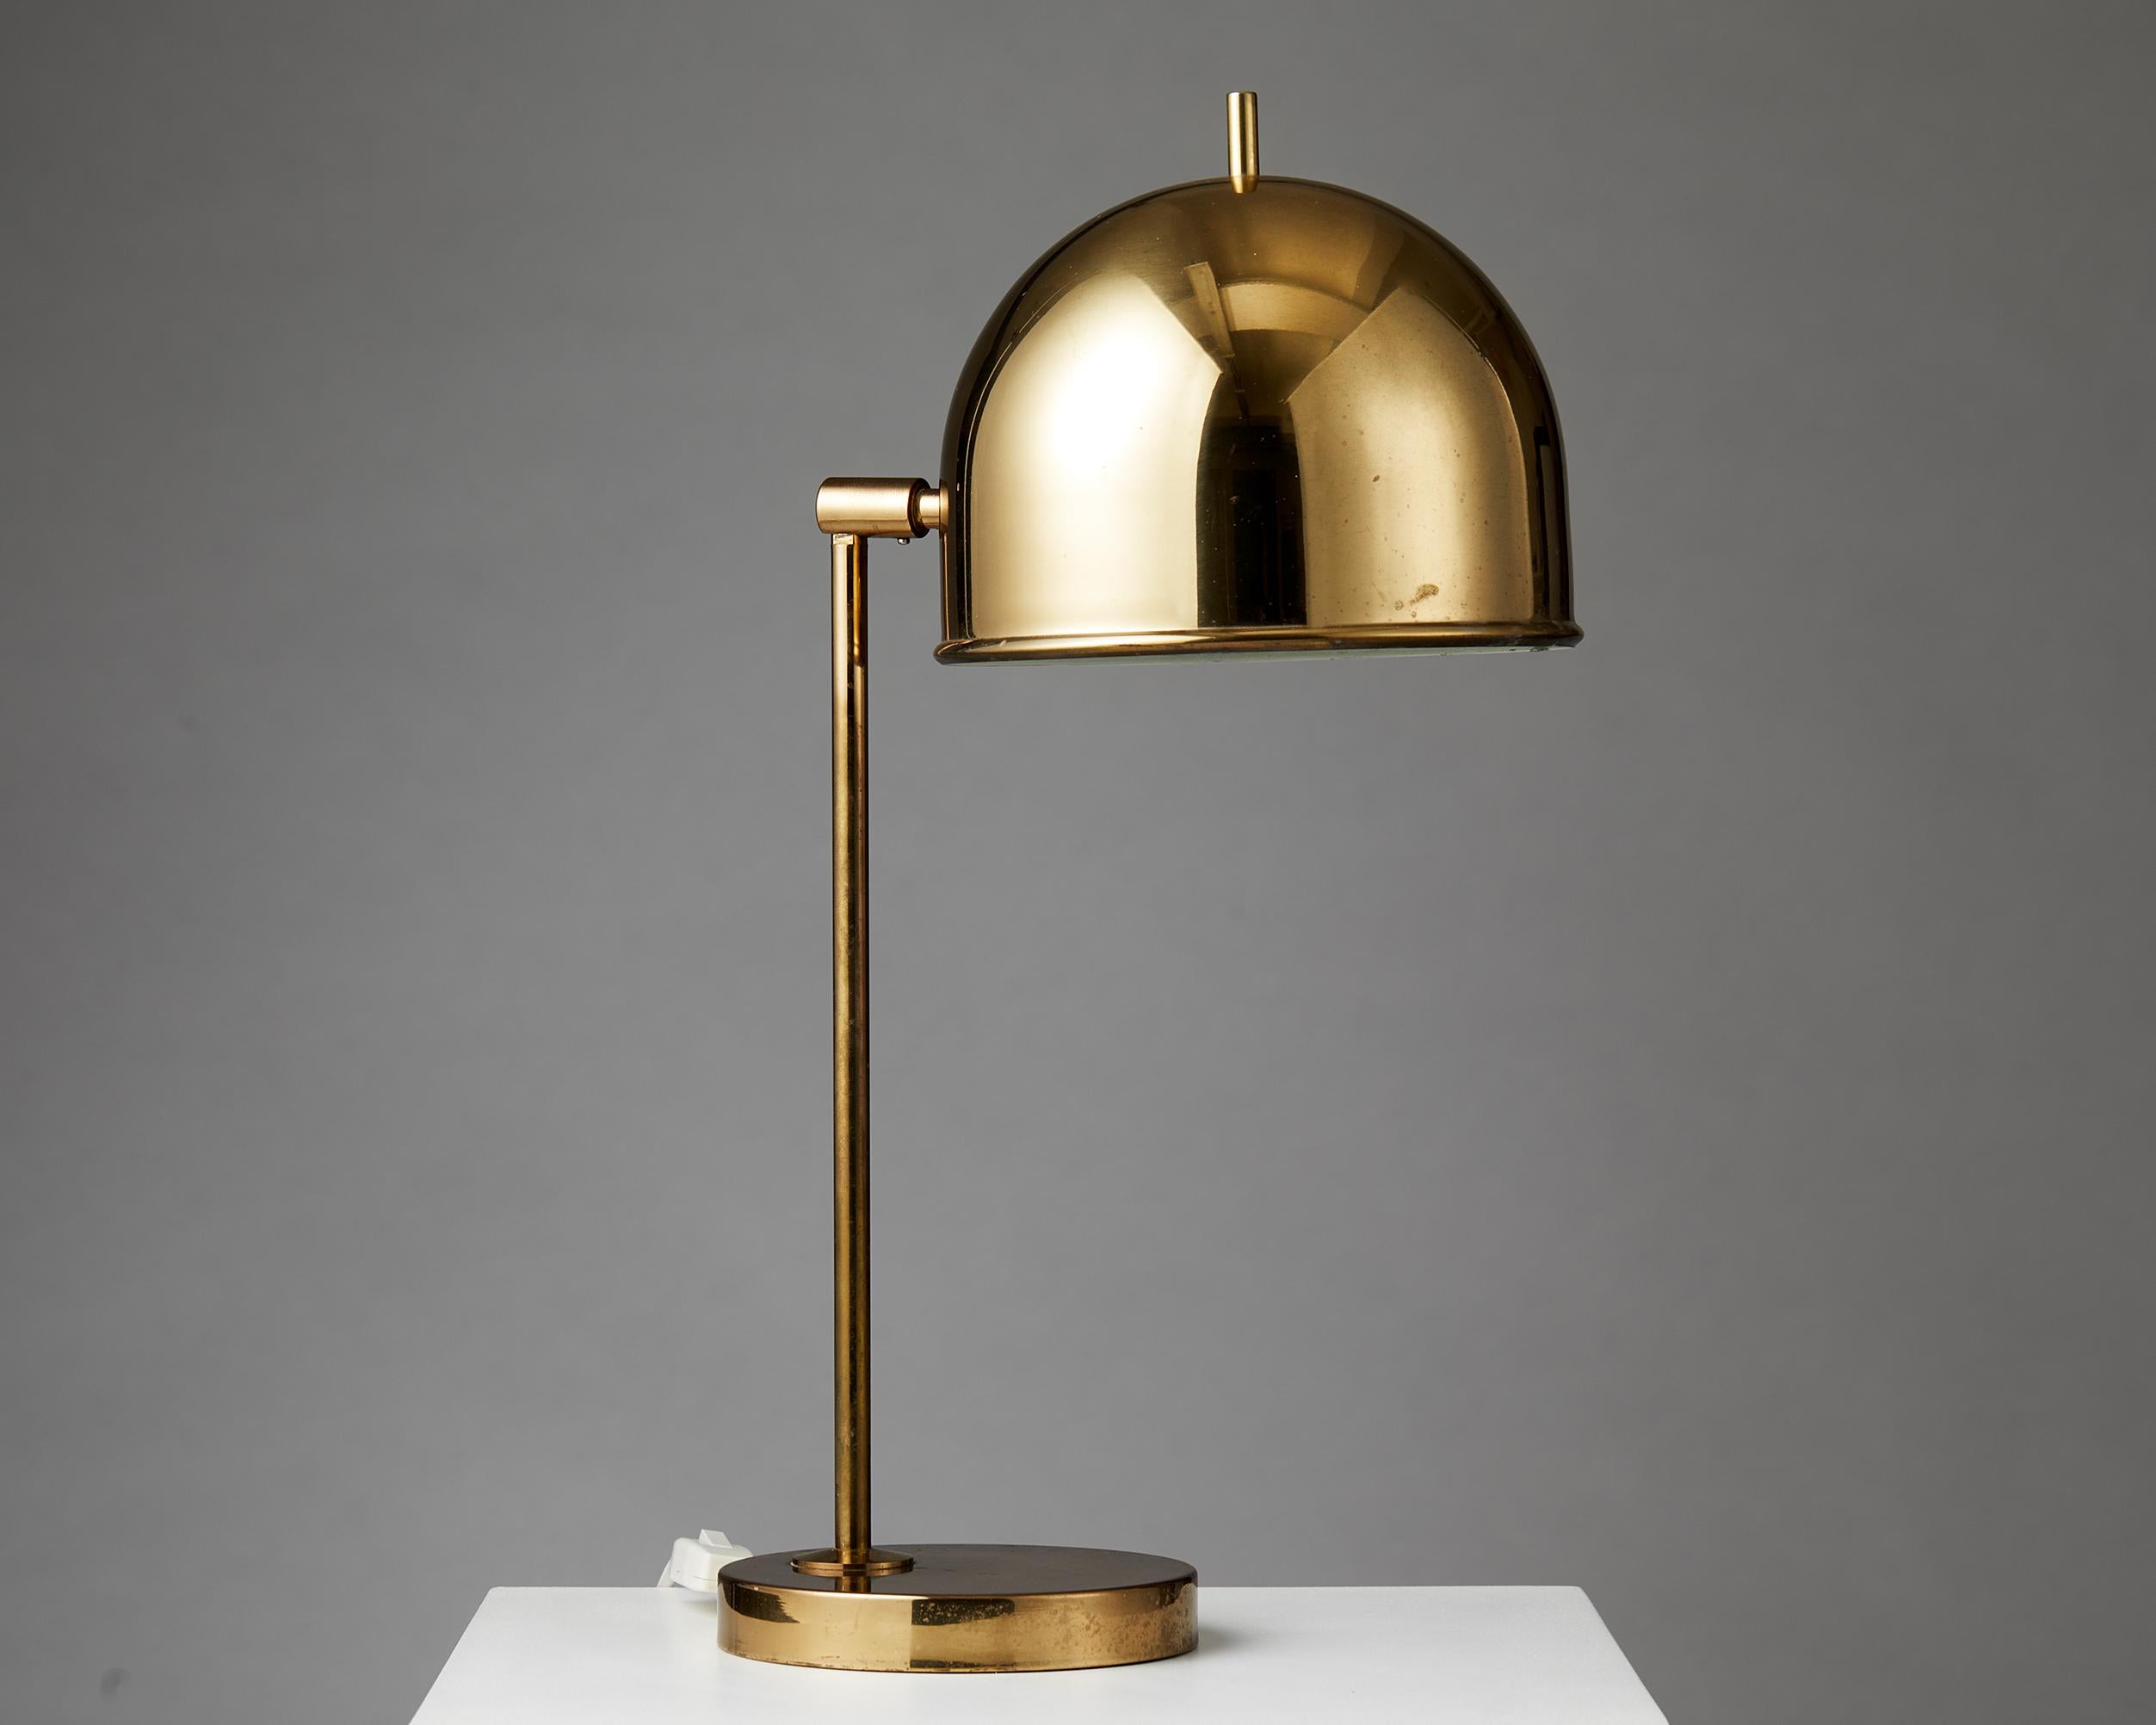 Table lamp B-075, designed by Eje Ahlgren for Bergboms,
Sweden. 1960´s.
Polished brass.
Stamped ‘Bergbom B-075 B-075’

With its bulbous shape, this playful lamp’s intriguing proportions make it a unique Scandinavian collectable. Model B-075 is very